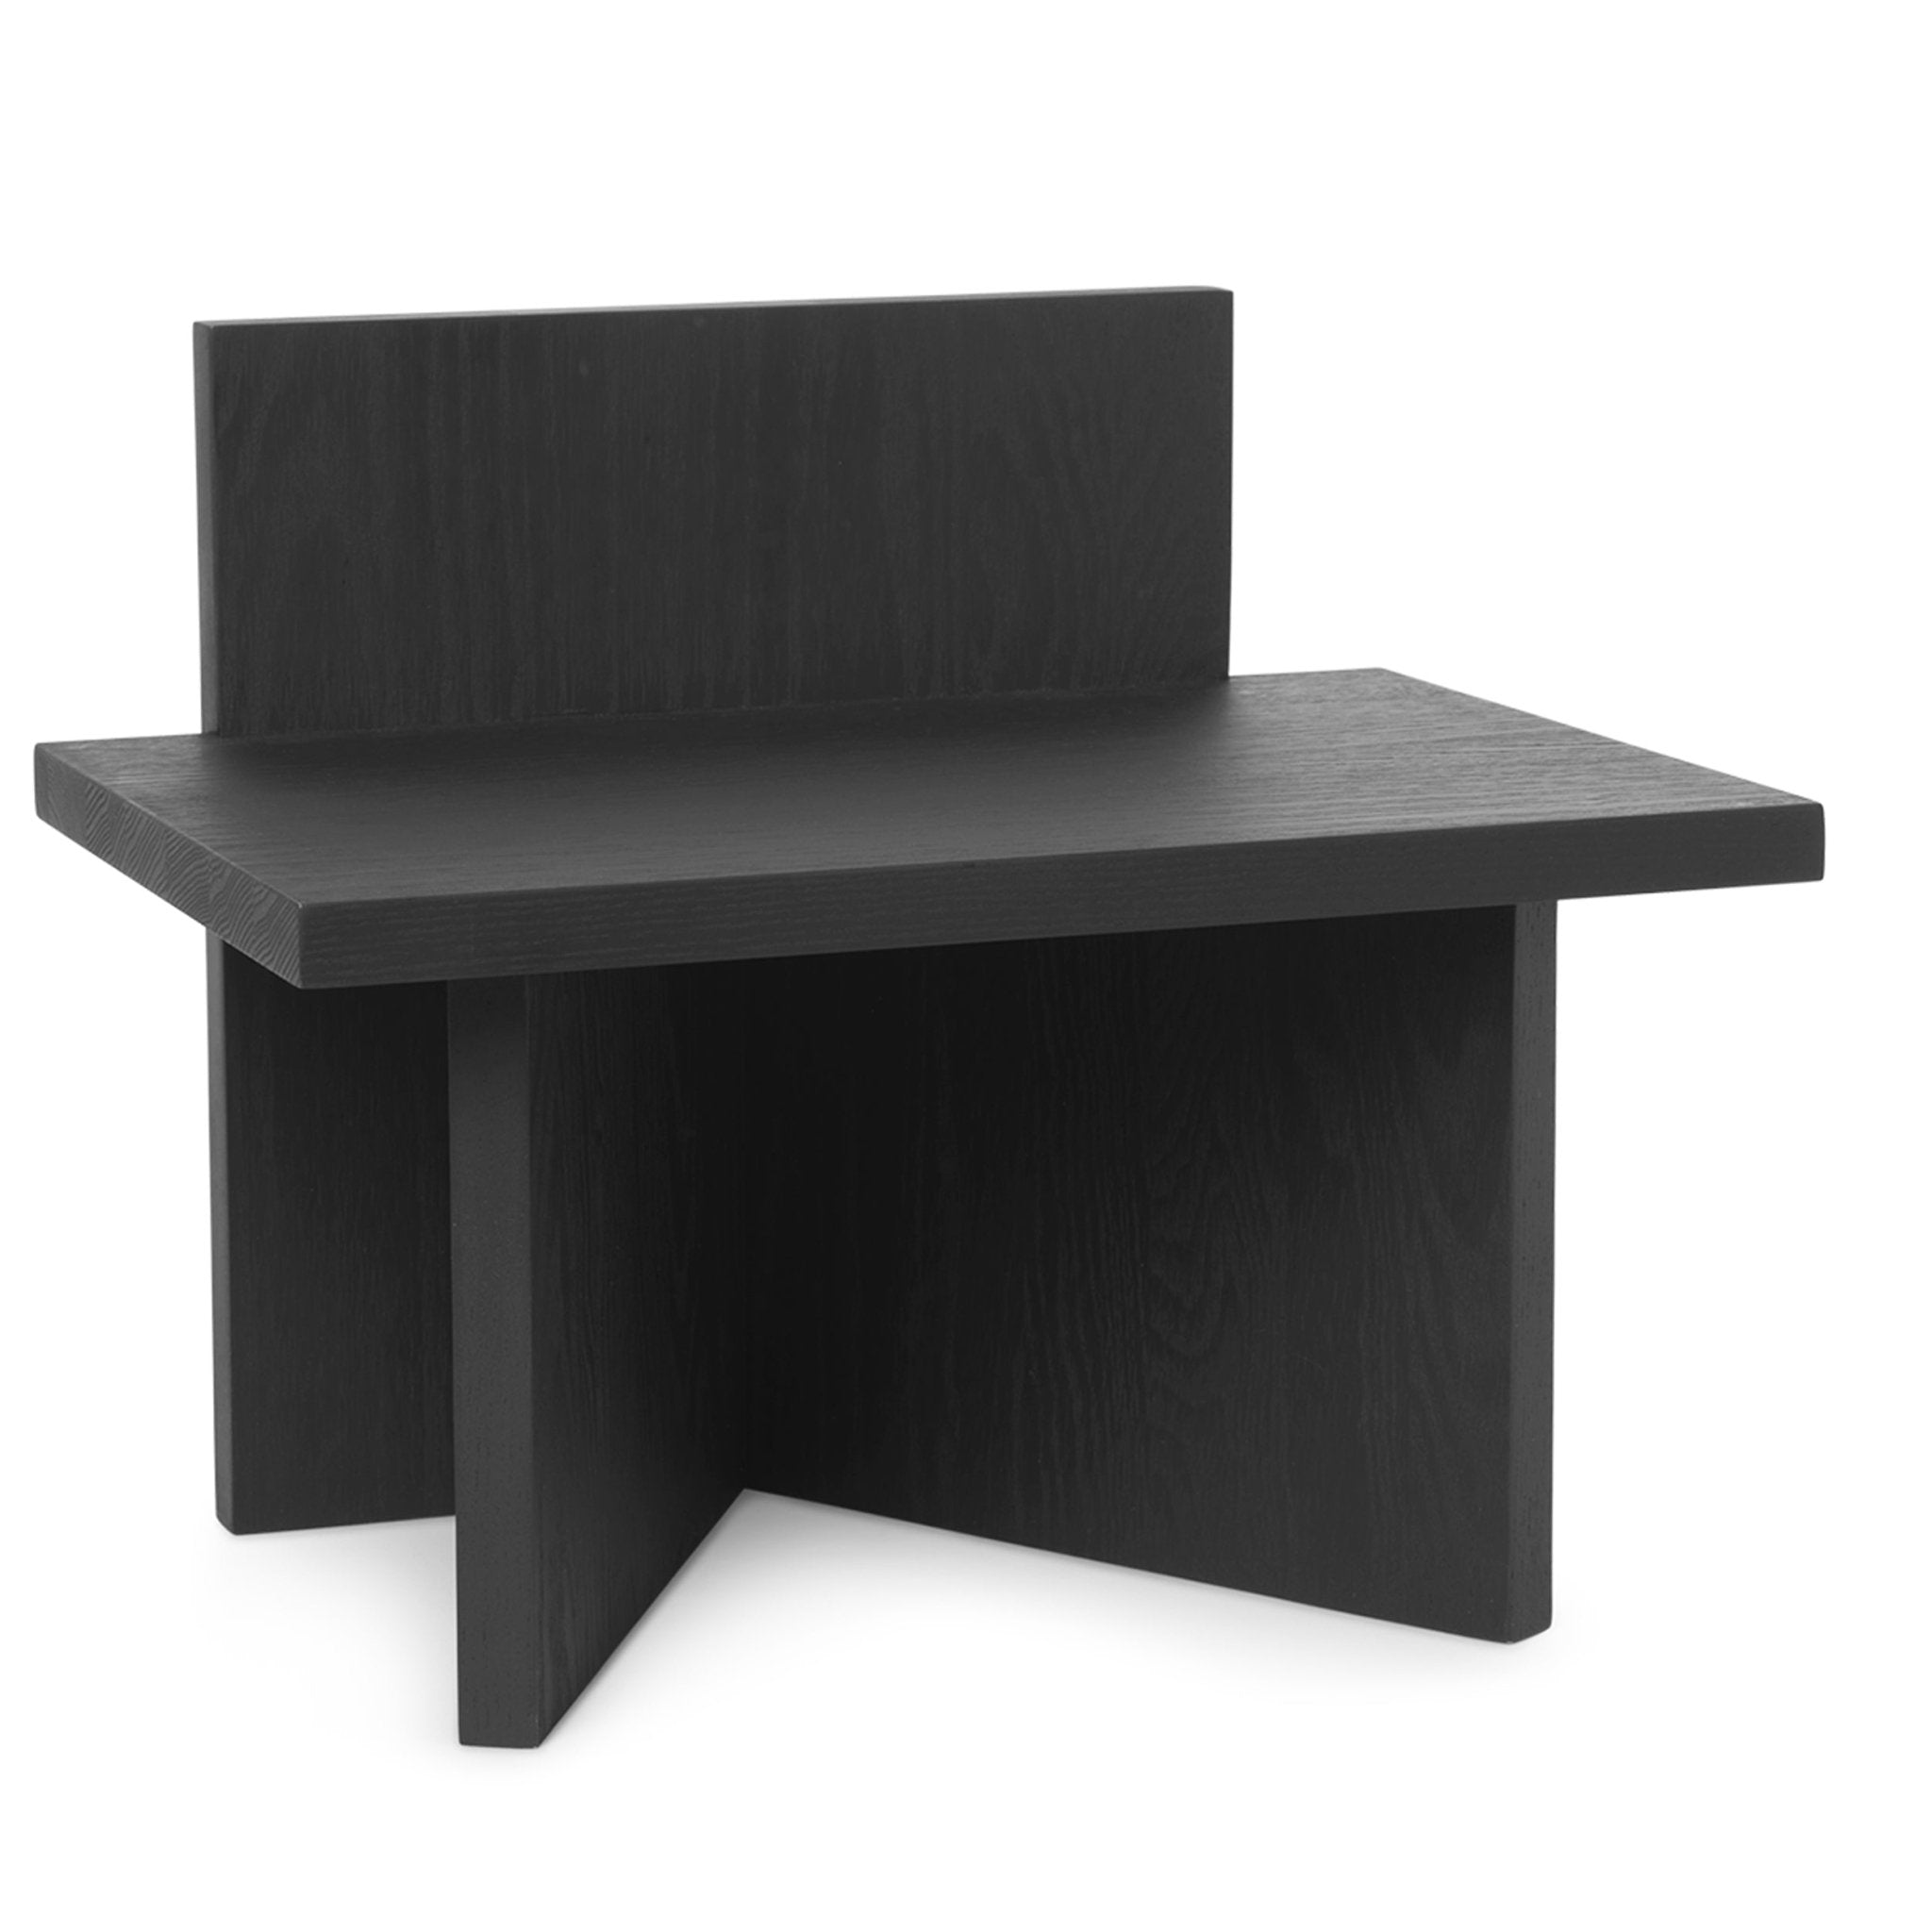 Oblique Stool - Black Stained Ash